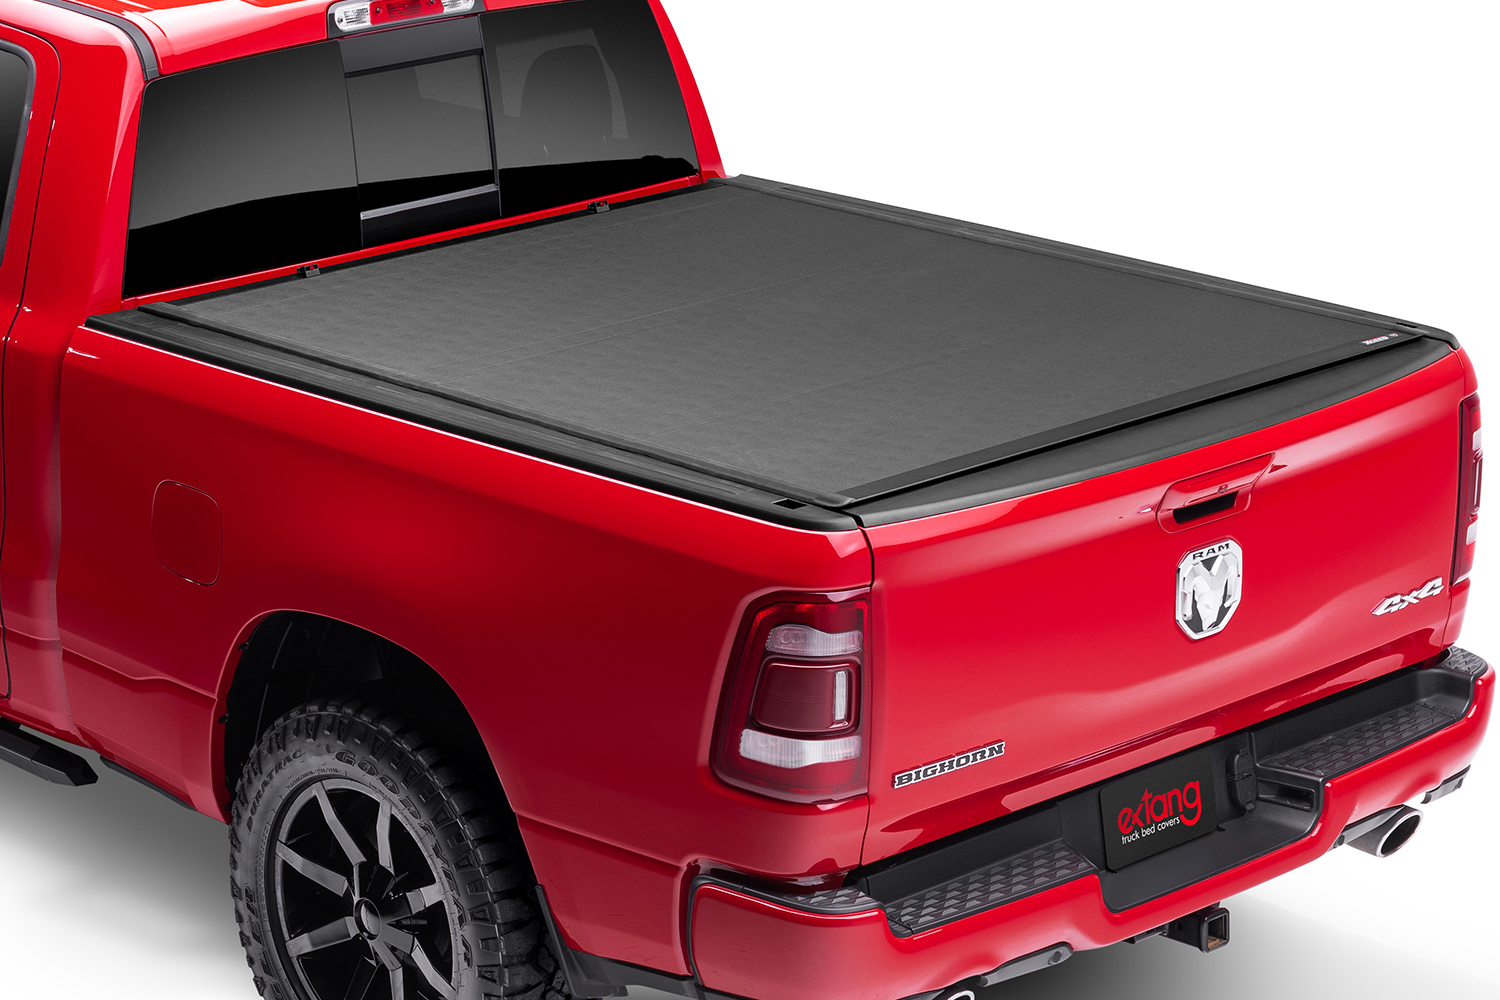 Extang Xceed Tonneau Cover Read Reviews And FREE SHIPPING